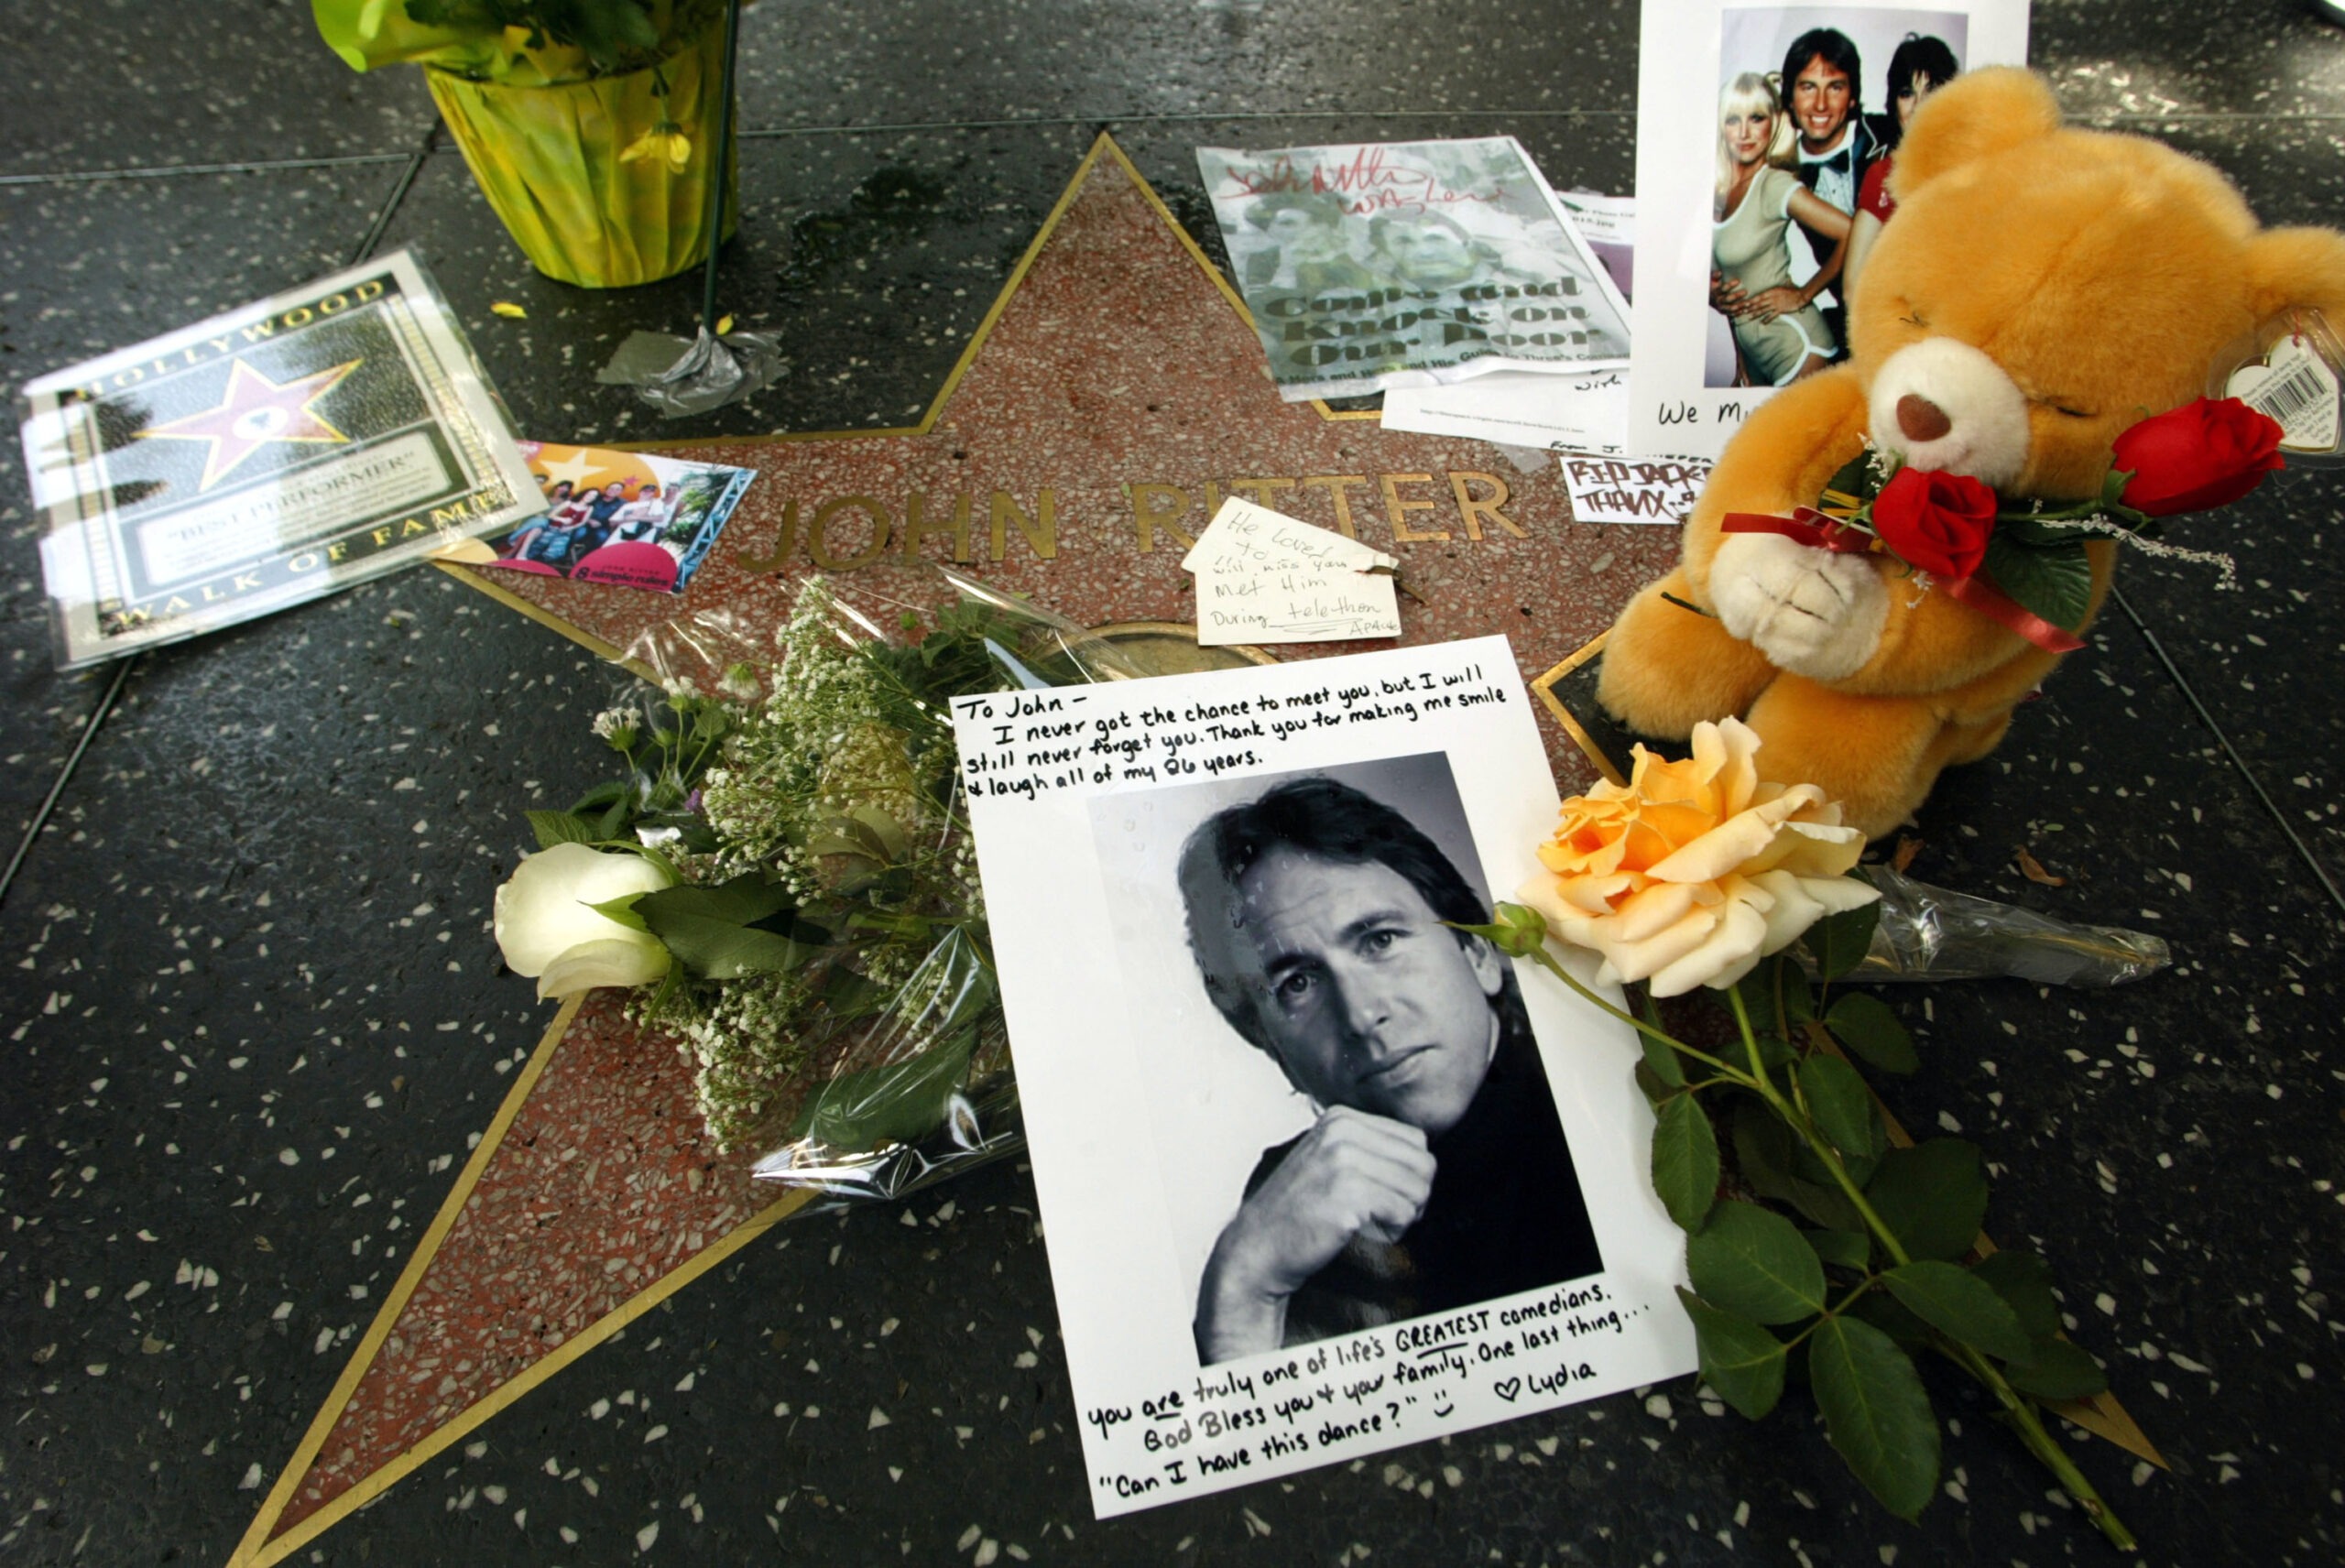 John Ritter's star on the Hollywood Walk of Fame memorialized with flowers and gifts by fans | Source: Getty Images